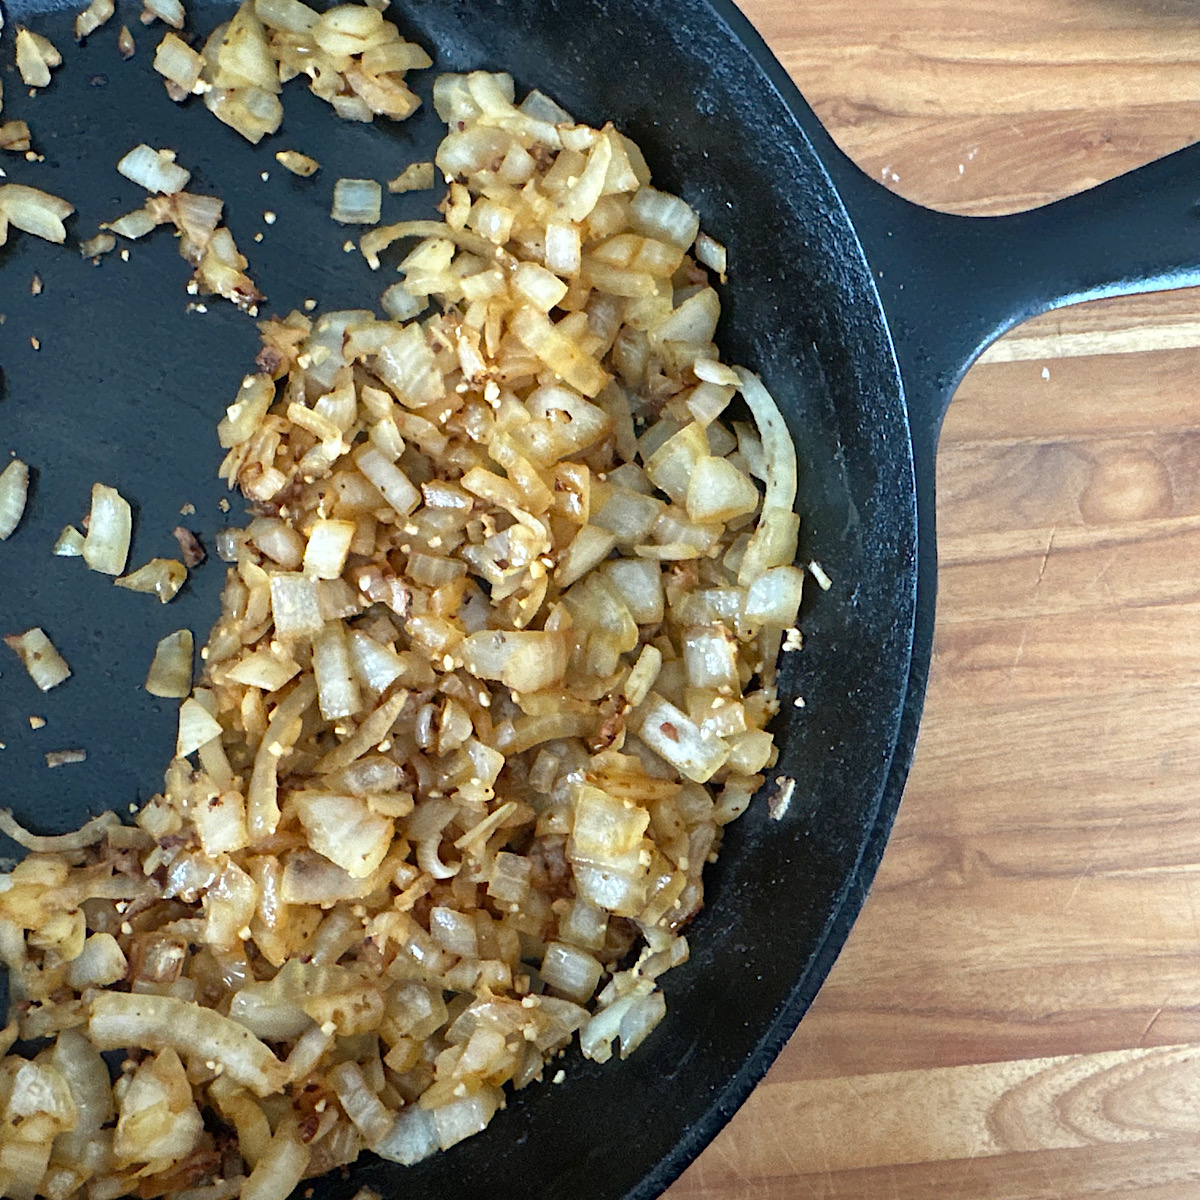 Chopped onions in skillet caramelized in the chorizo fat.